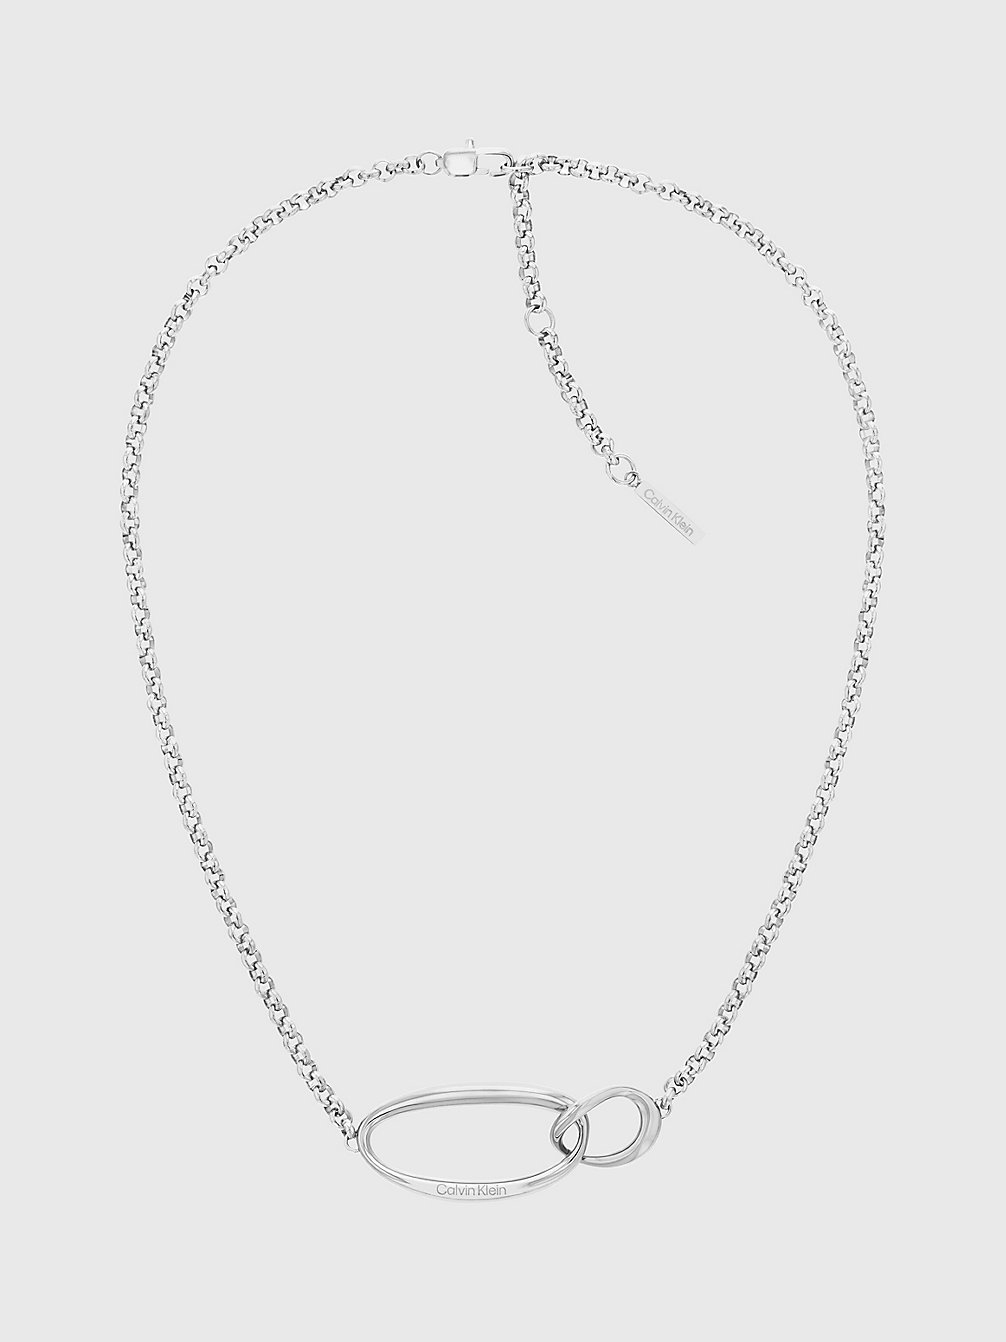 Collana - Playful Organic Shapes > SILVER > undefined donna > Calvin Klein